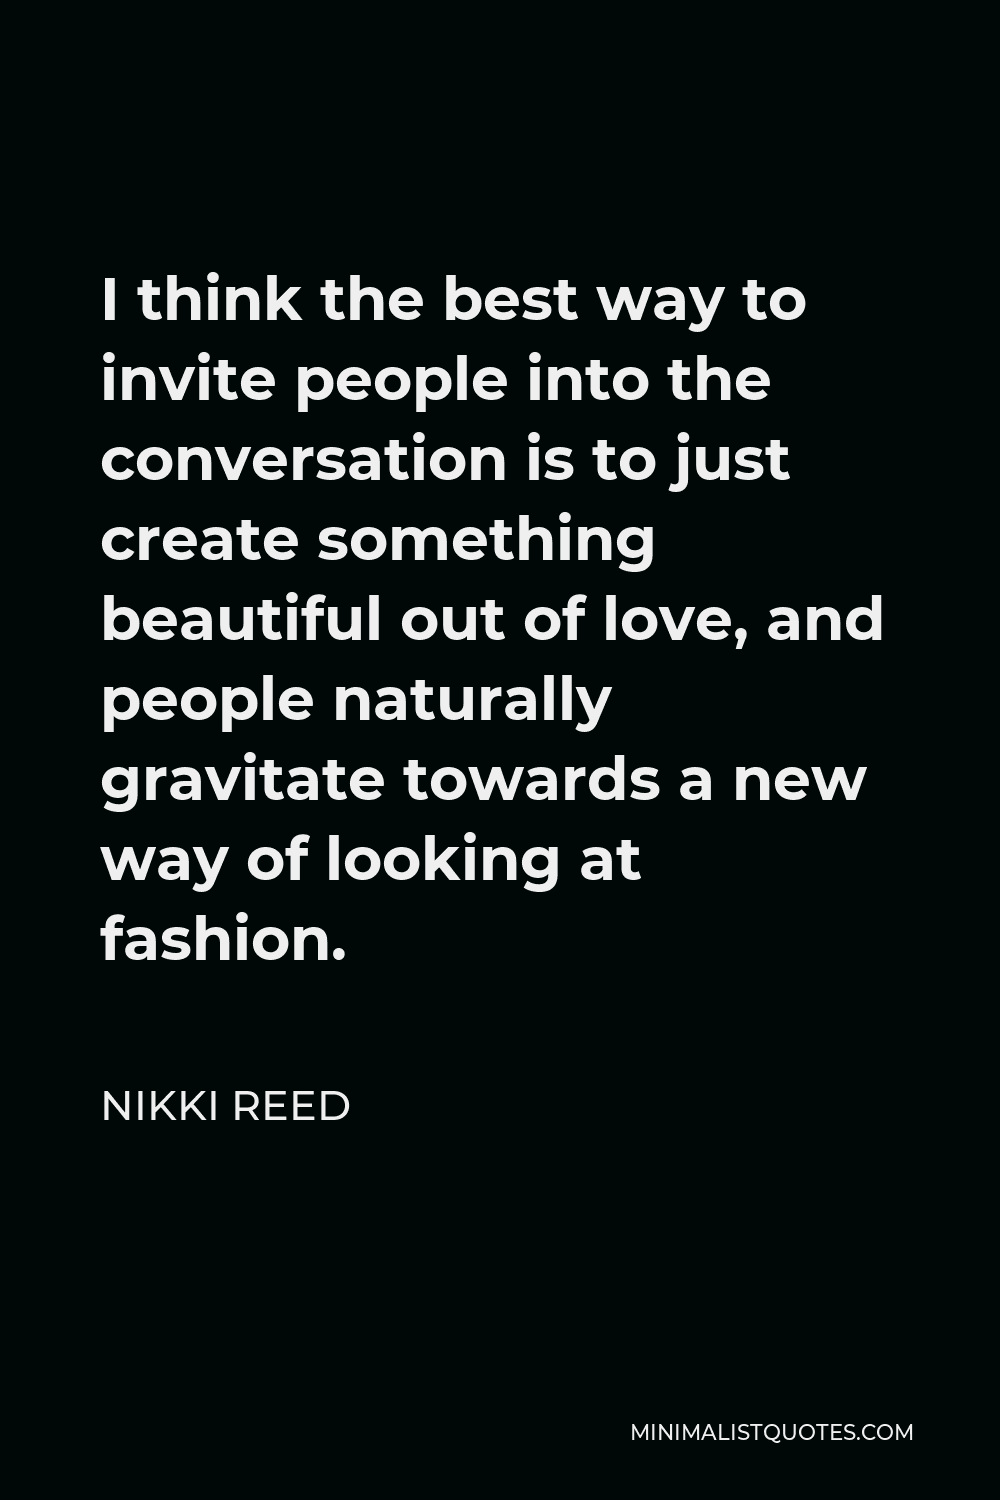 Nikki Reed Quote - I think the best way to invite people into the conversation is to just create something beautiful out of love, and people naturally gravitate towards a new way of looking at fashion.